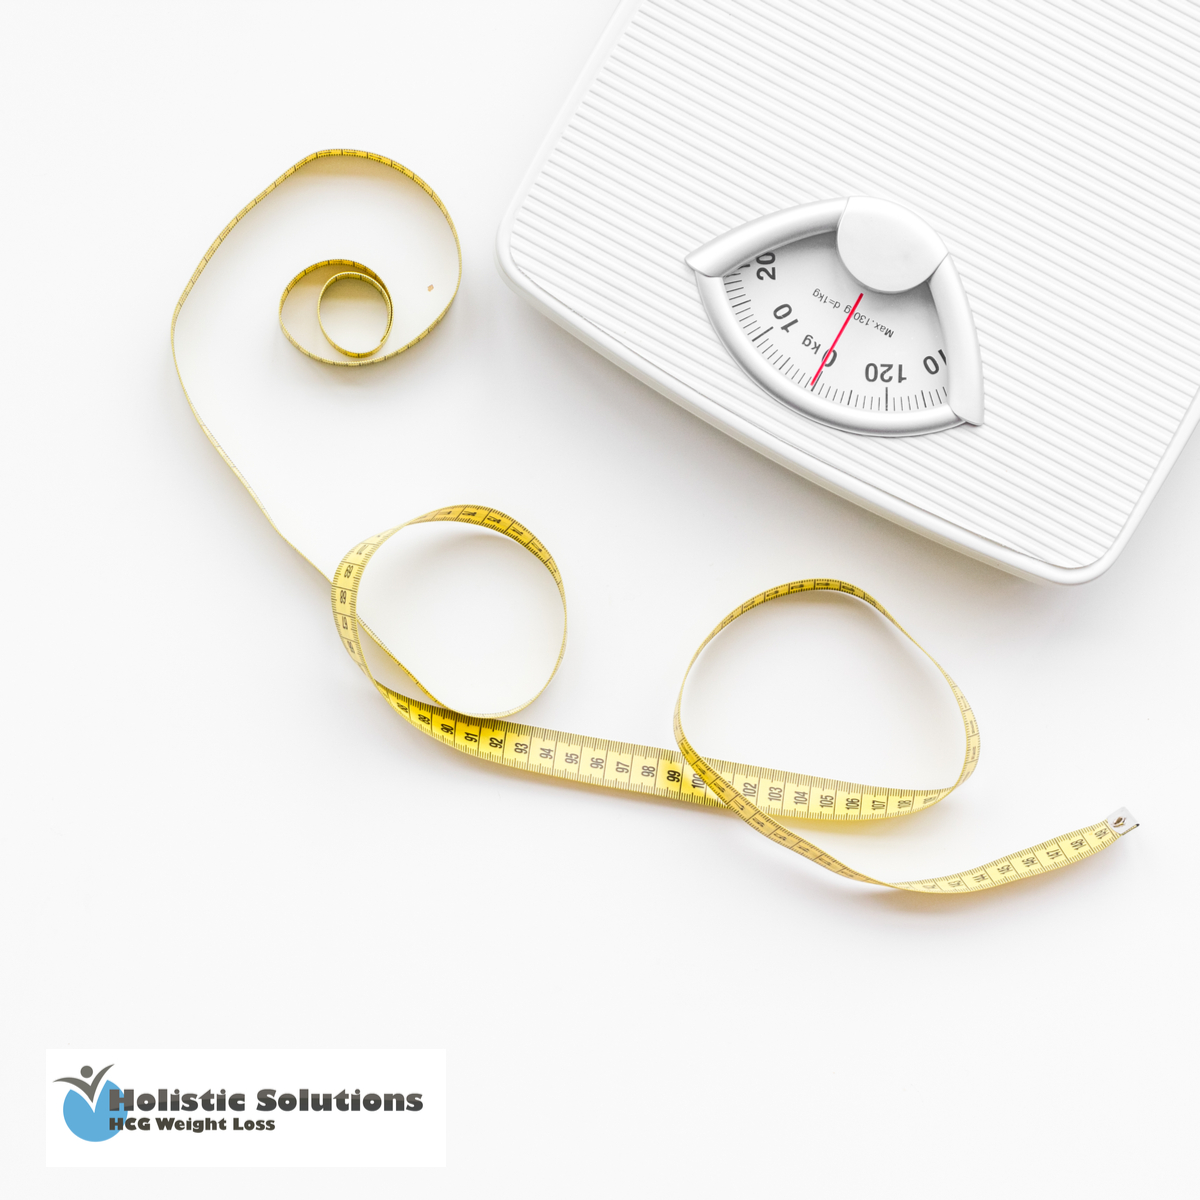 Safe, Effective HCG Injections To Lose Weight Near Orange County